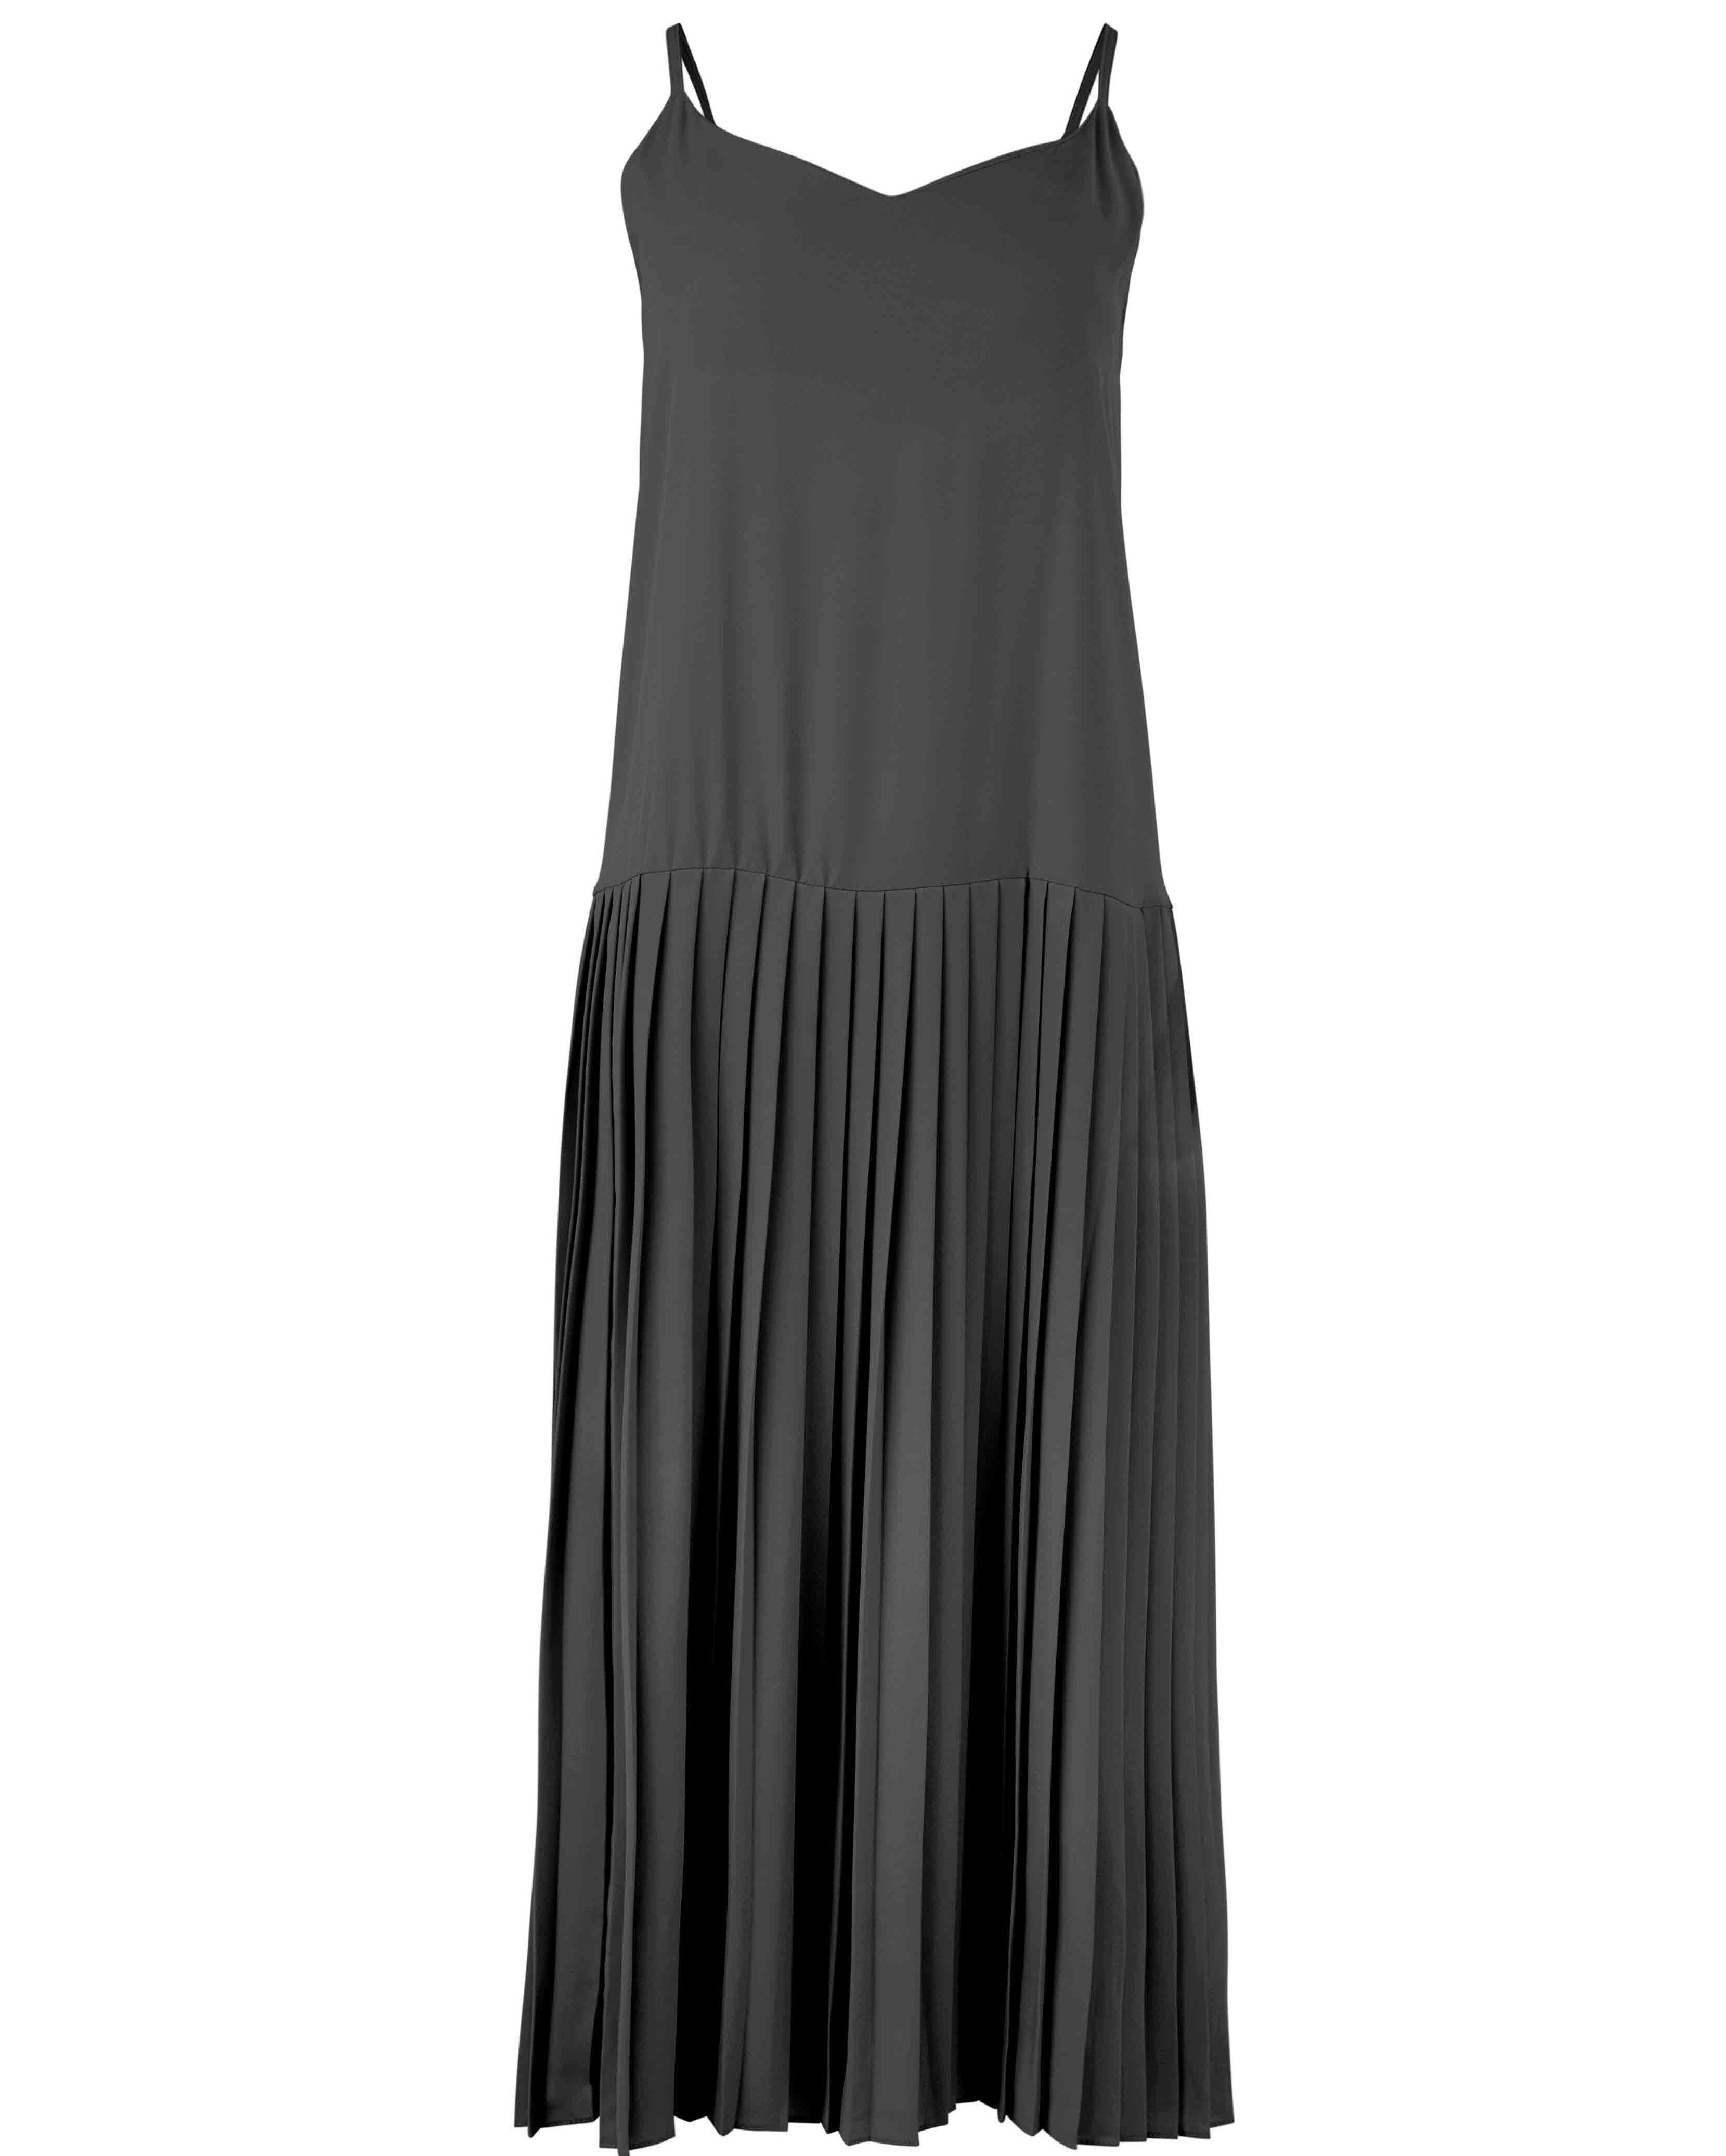 PLEATED LITTLE LIES DRESS (BLACK)- TRELISE COOPER W20 Boxing Day Sale